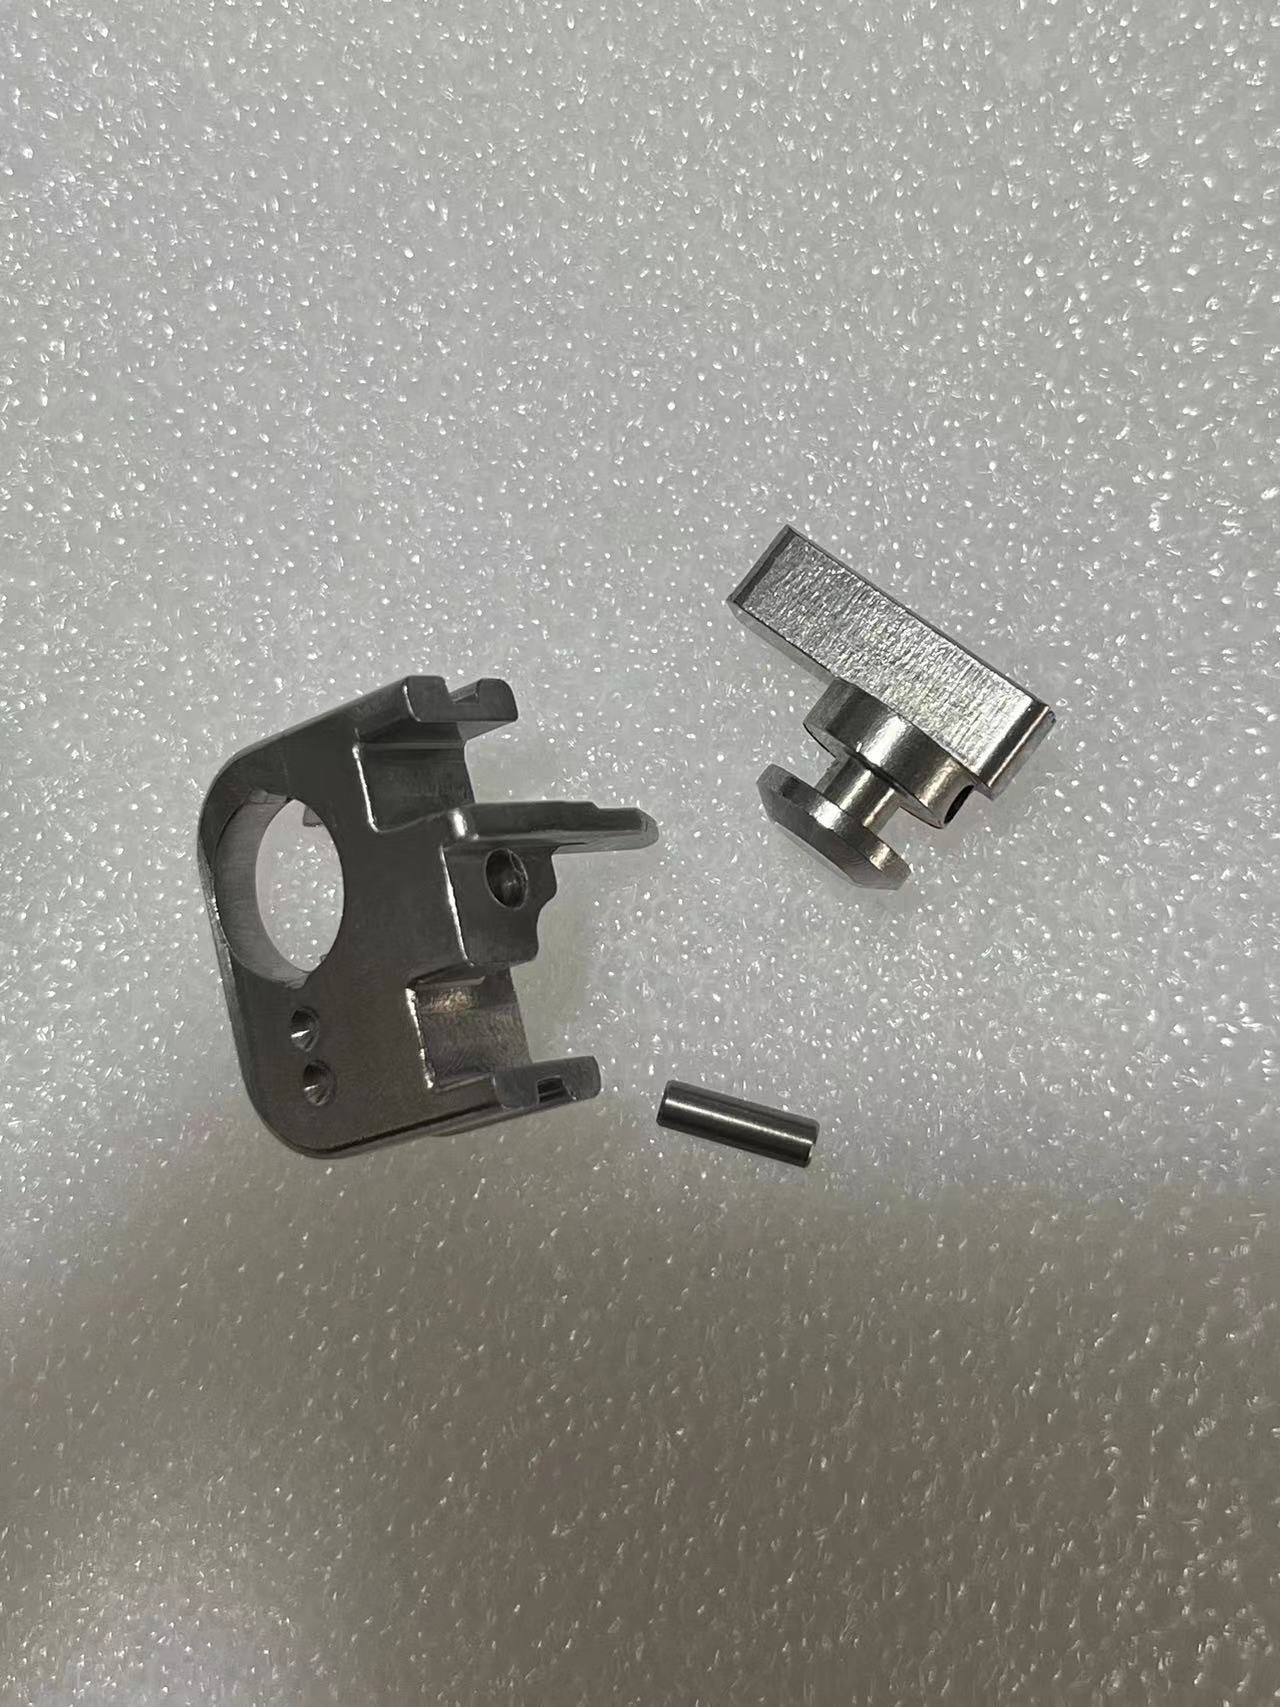 

Gen 4-5 Stainless Steel Full automatic Switch Selector Auto Sear modification required for Glock/17/19/19X/20/21/22/23/25/30/32 1pcs (43X not ).cx, 1set stainless